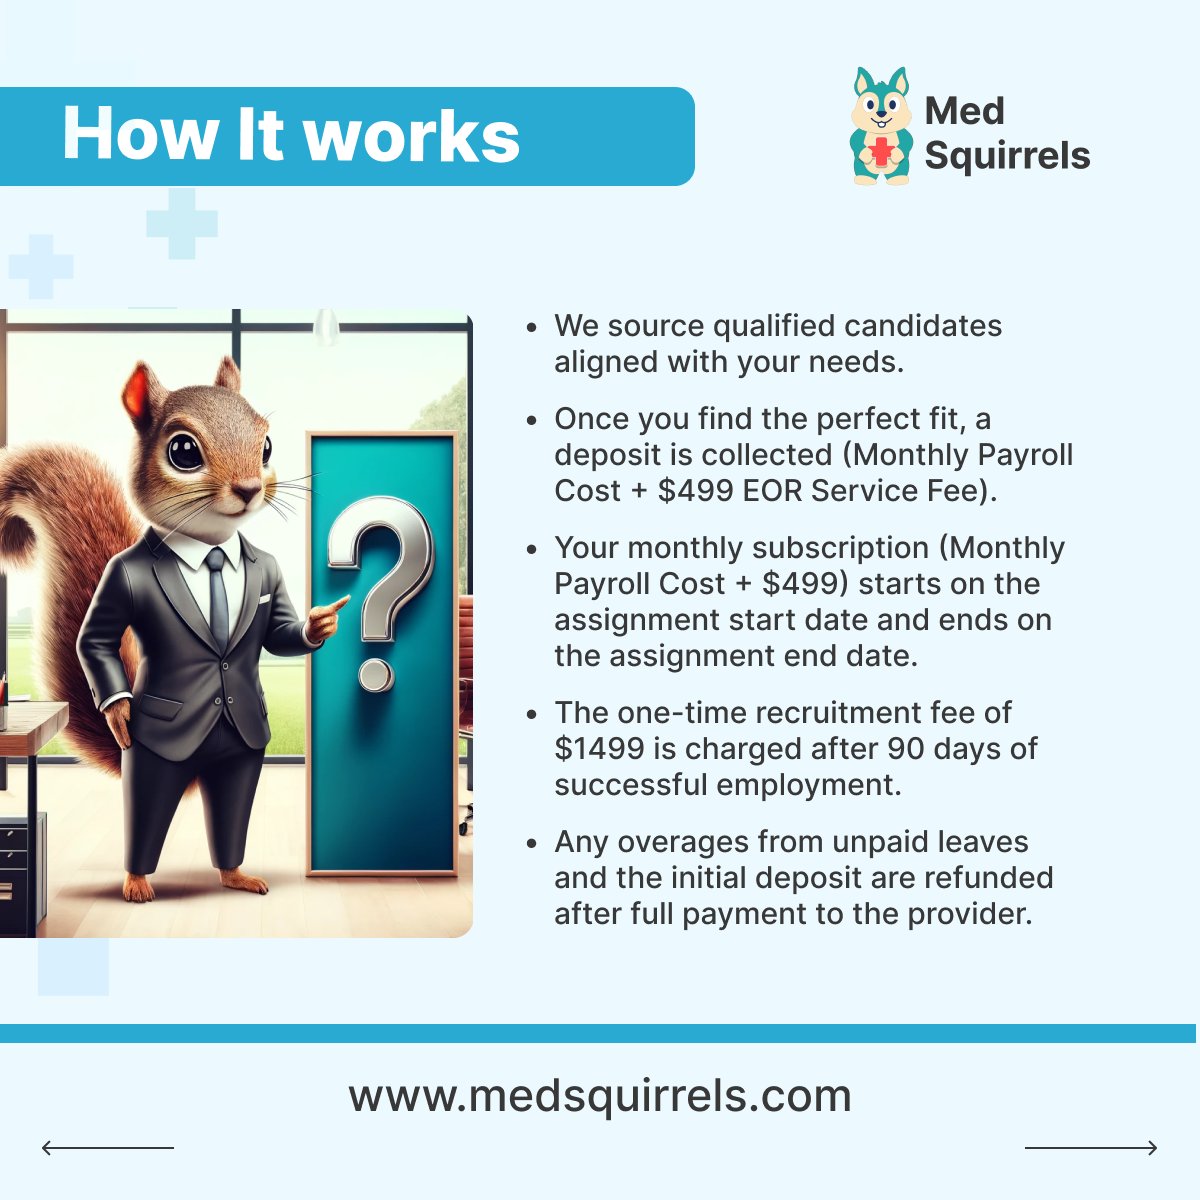 Need healthcare talents?
From recruitment to payroll—MedSquirrels handles it all.
Swipe through this carousel to discover how our Orange Plan works for you!
#MedSquirrels #healthcarestaffing #HealthcareHiring #saasplatform  #HealthTech #SmarterHiring #MedSquirrelsOrangePlan